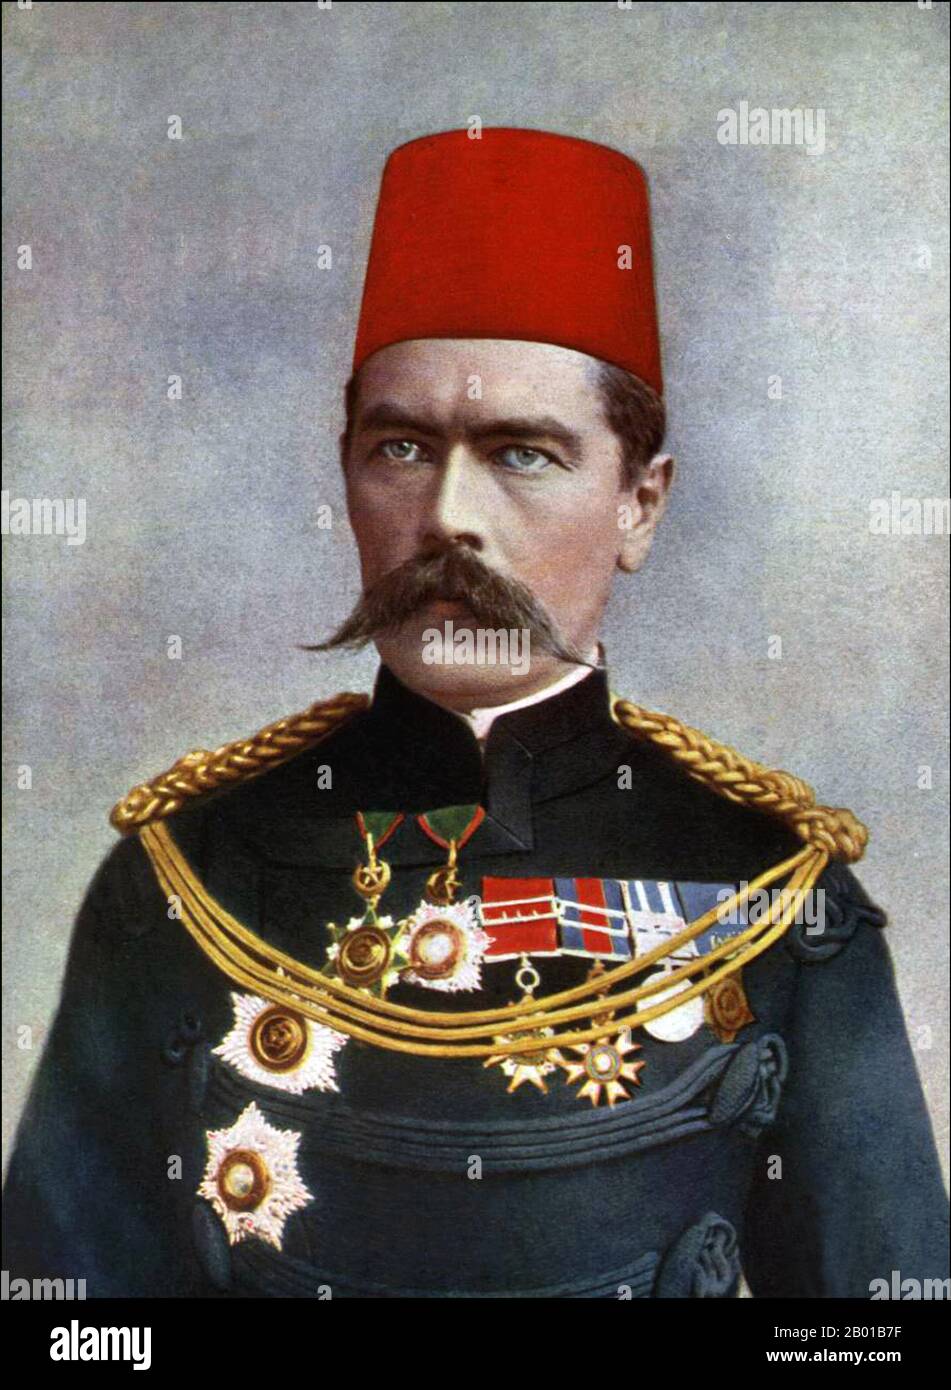 United Kingdom: Field Marshal Horatio Herbert Kitchener, 1st Earl Kitchener KG, KP, GCB, OM, GCSI, GCMG, GCIE, ADC, PC (24 June 1850 - 5 June 1916), Irish-born British Field Marshal, patriot and arch imperialist. Photo by C. N. Robinson (fl. early 20th century), 1900.  Kitchener won fame in 1898 for winning the Battle of Omdurman and securing control of the Sudan, after which he was given the title 'Lord Kitchener of Khartoum'. As Chief of Staff (1900-1902) in the second Boer war he played a key role in Lord Roberts' conquest of the Boer Republics, then succeeded Roberts as commander-in-chief. Stock Photo